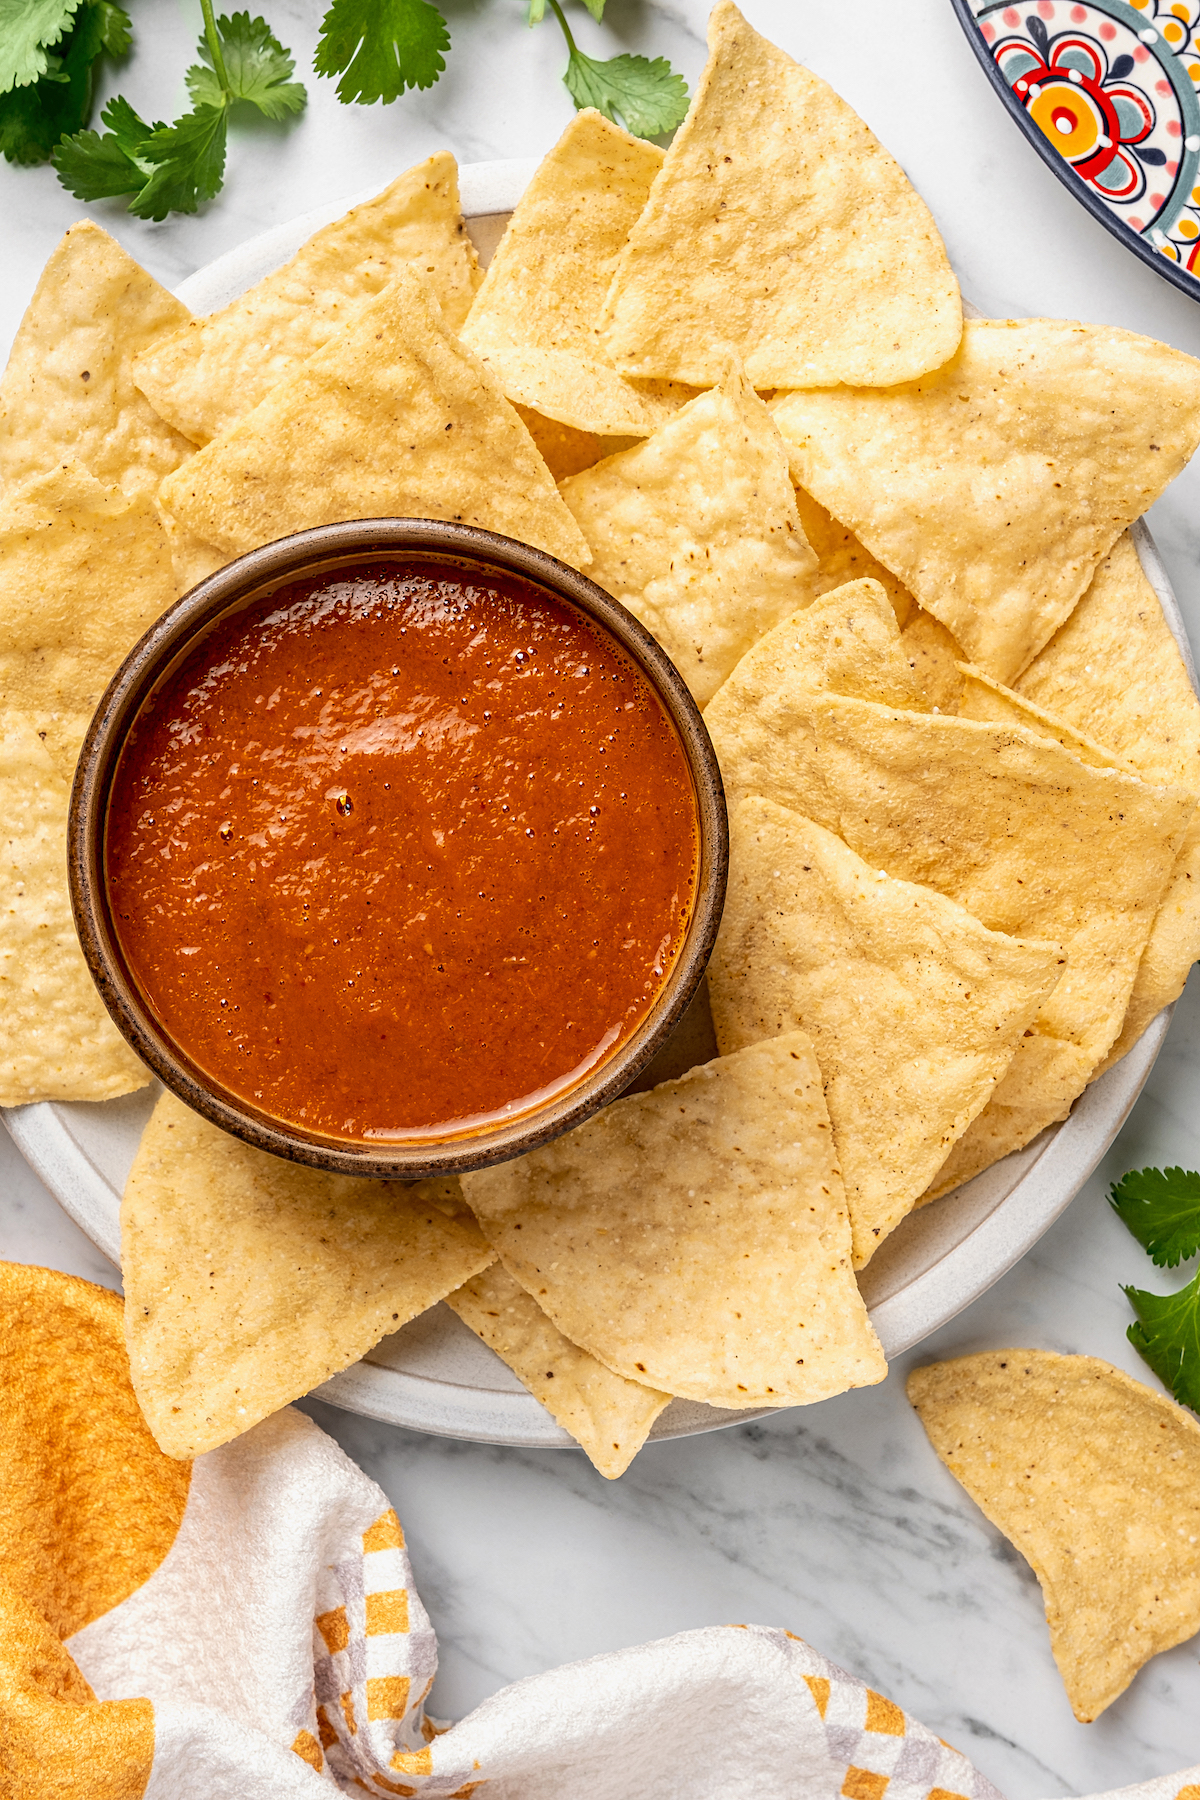 Salsa morita with corn chips on the side.